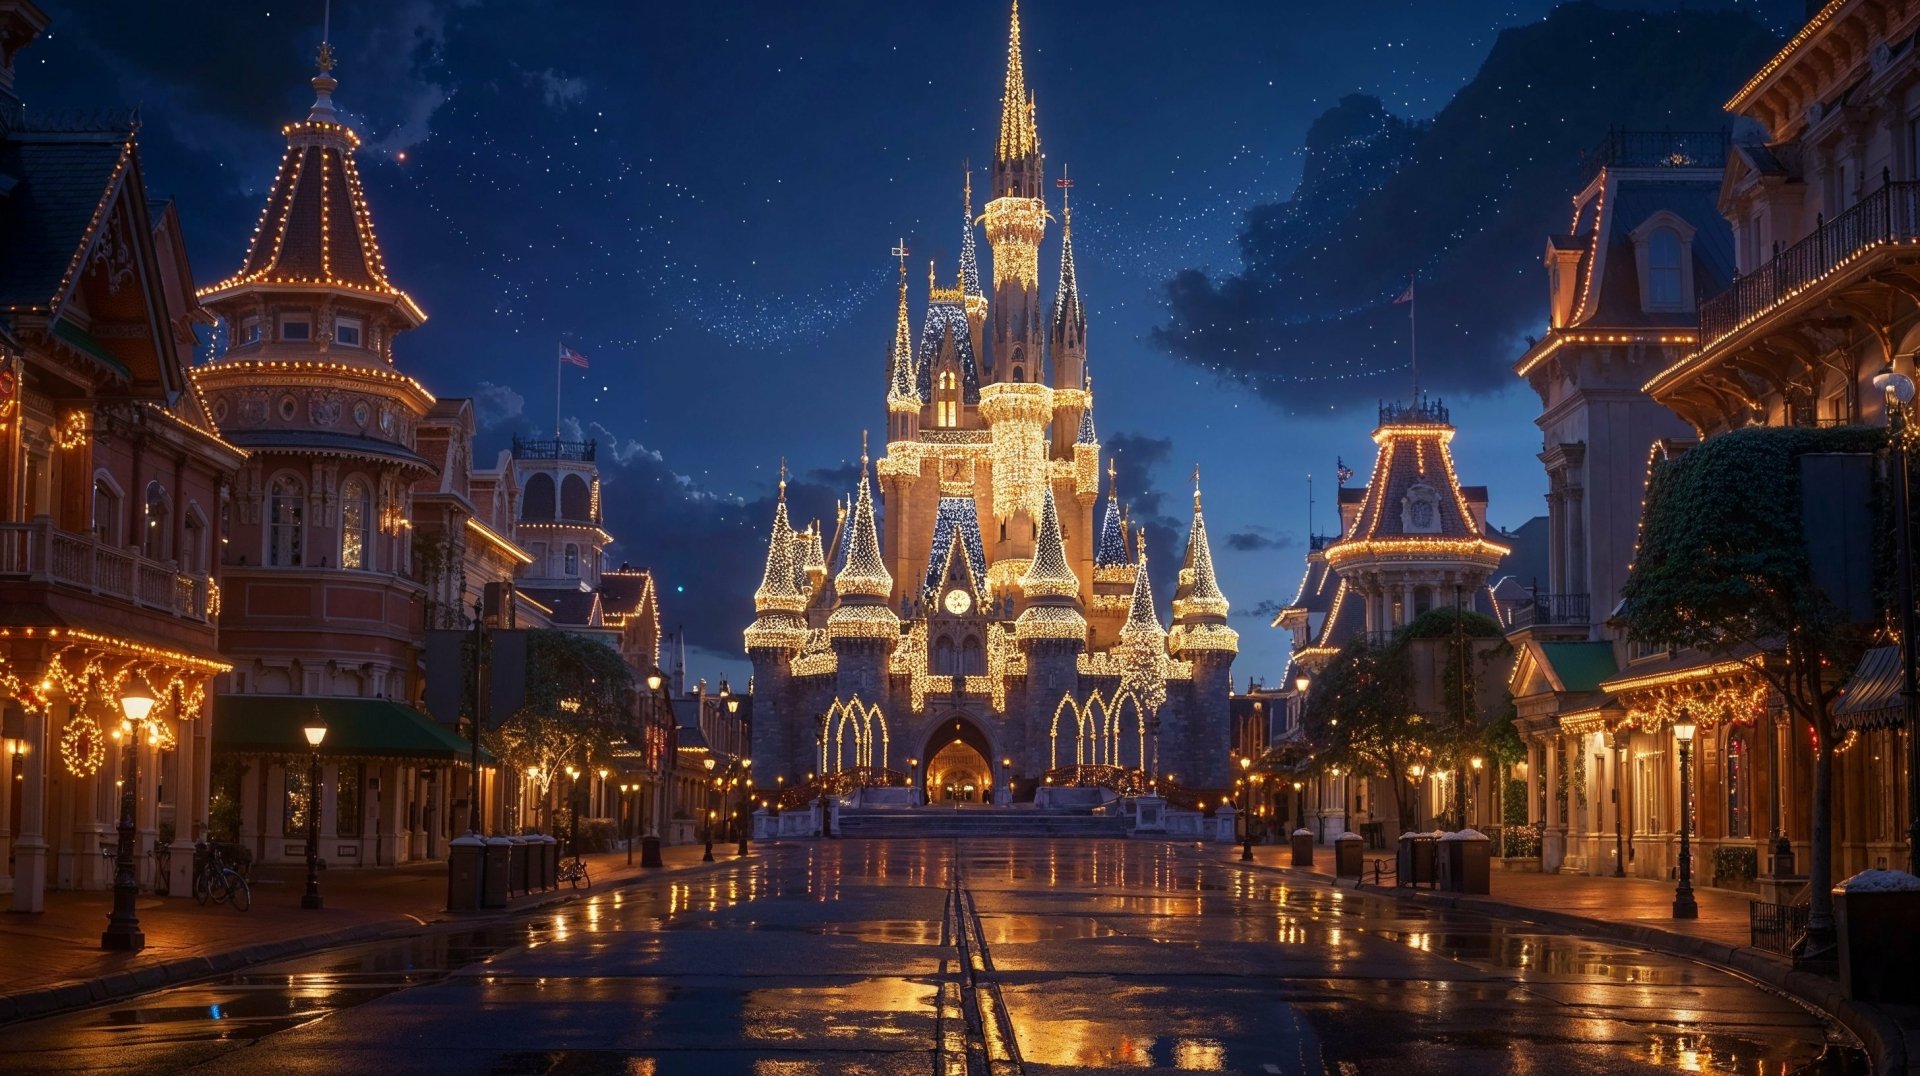 HD desktop wallpaper of Walt Disney World's Cinderella Castle illuminated at night, reflecting on a wet, empty street with surrounding lit buildings, creating a magical ambiance.